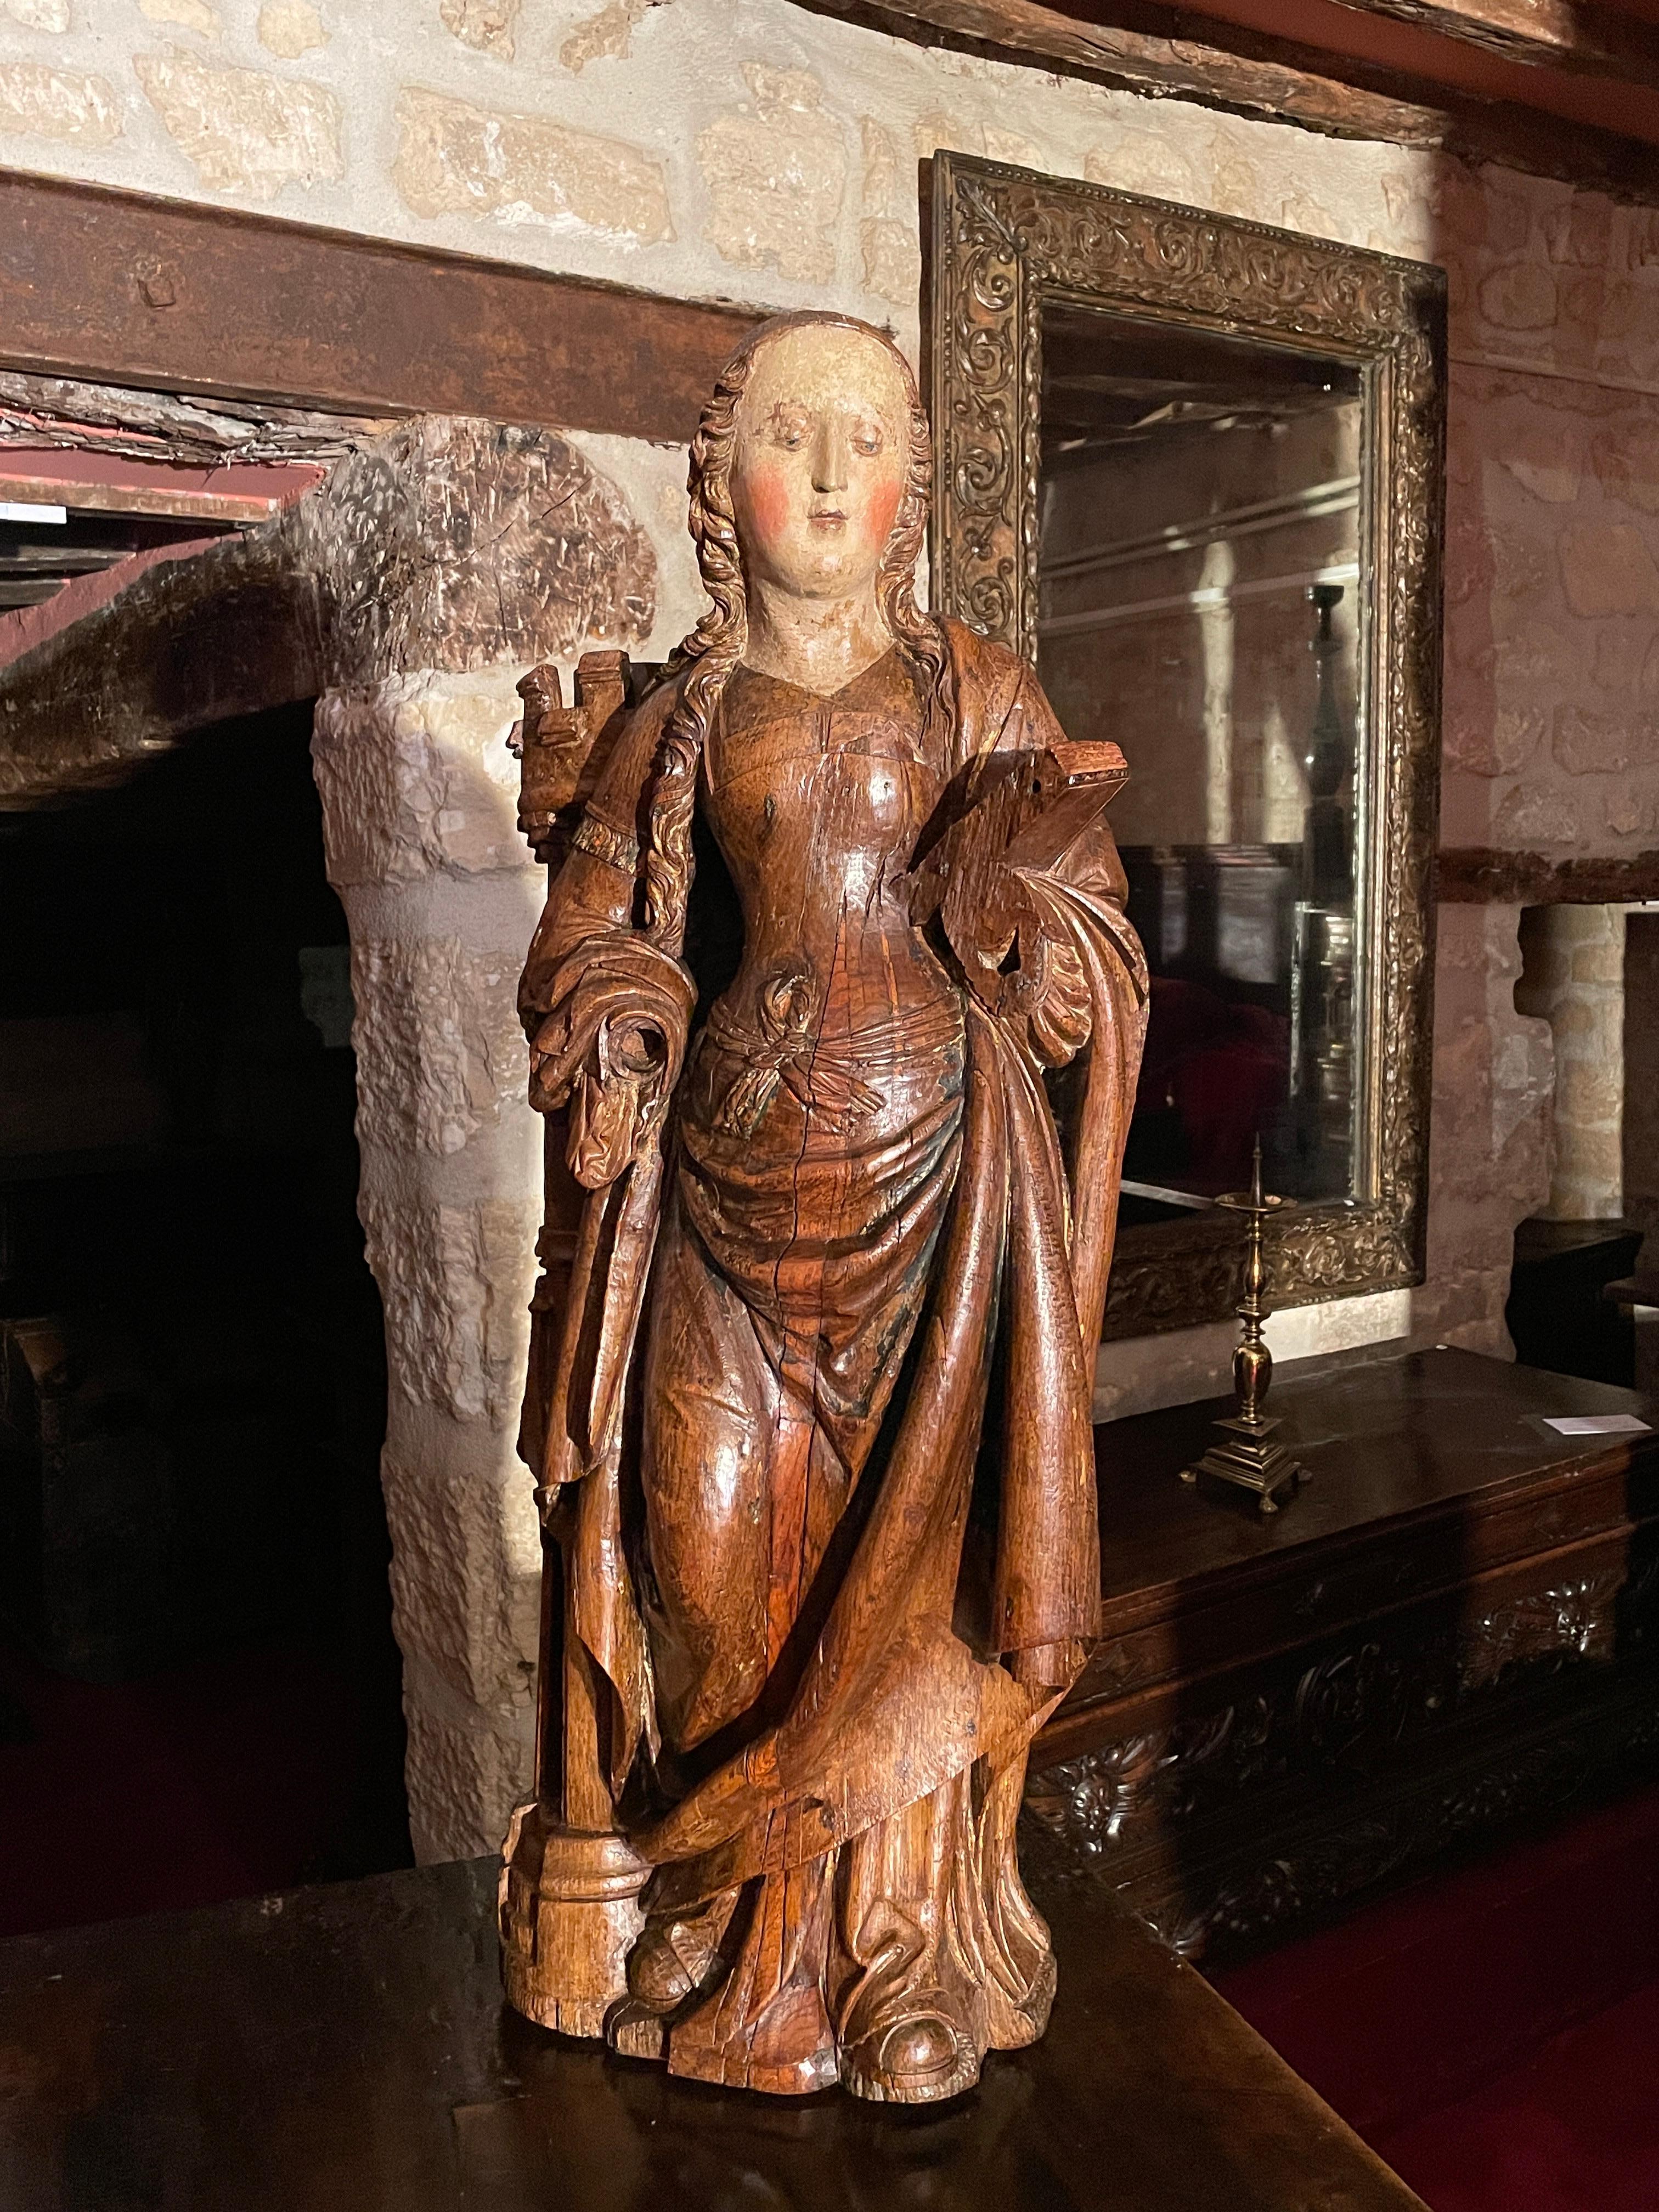 IMPORTANT WOOD SCULPTURE REPRESENTING SAINT BARBARA

ORIGIN : NORTHERN FRANCE OR FLANDERS
PERIOD : 16th CENTURY

Height:  103 cm
Length:  40 cm
Depth: 30 cm

Oak wood
Good condition



Saint Barbara was the daughter of Dioscorus who imprisonned her